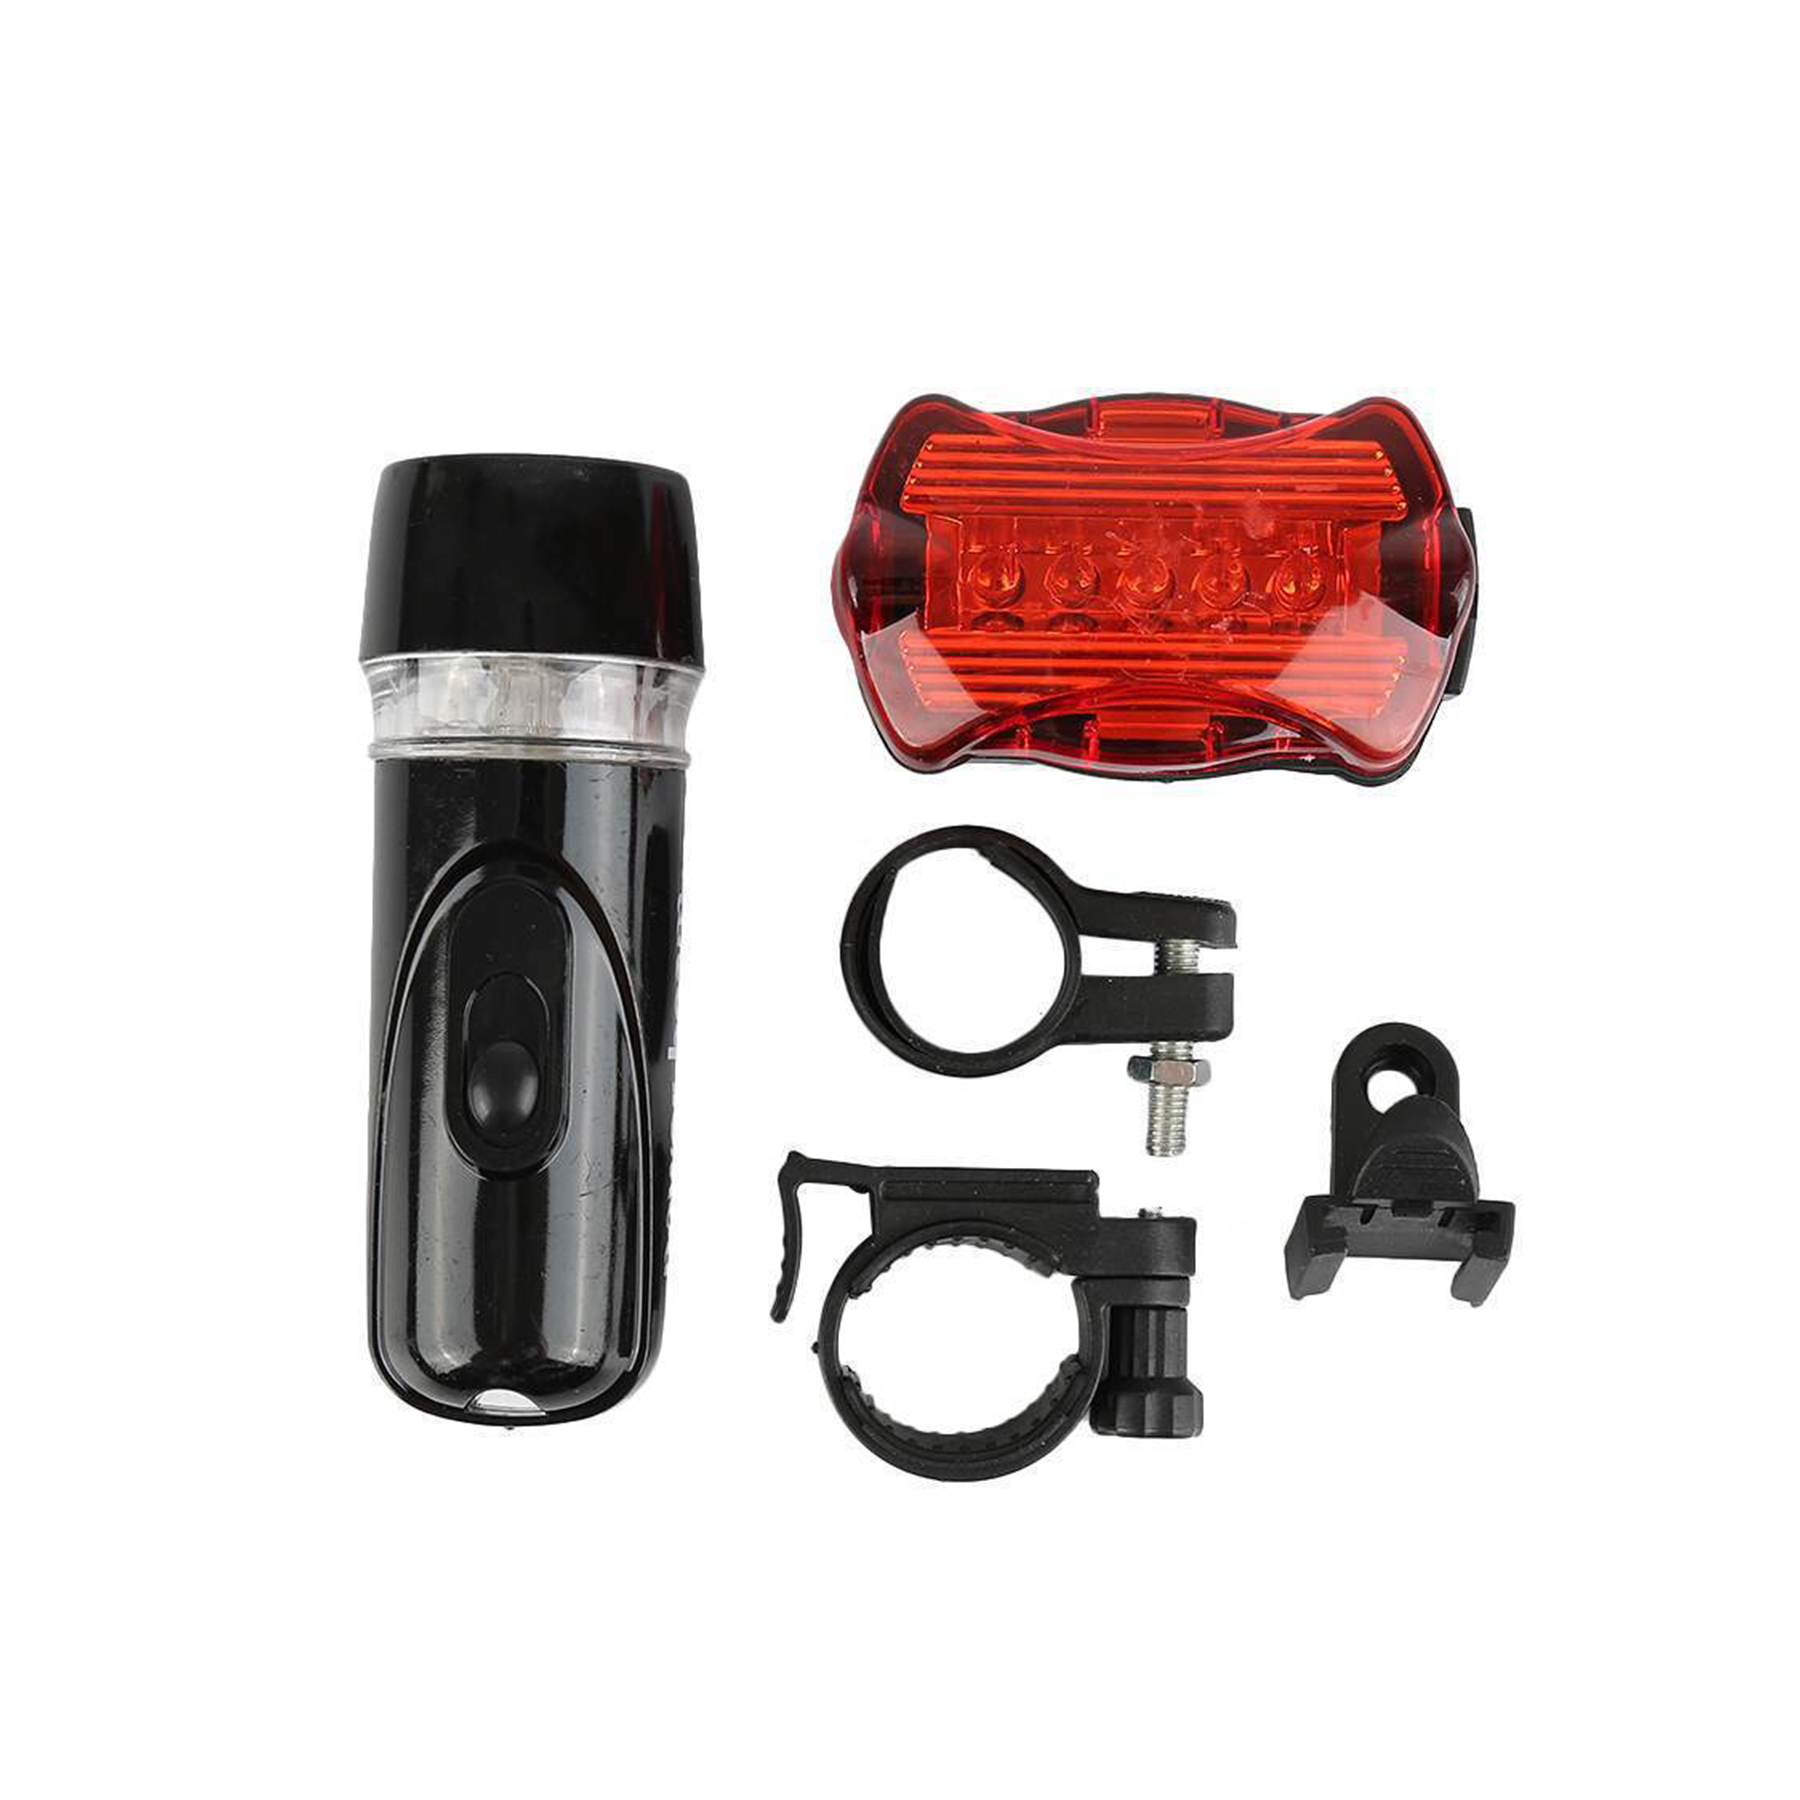  Bicycle LED Headlight and Taillight Set